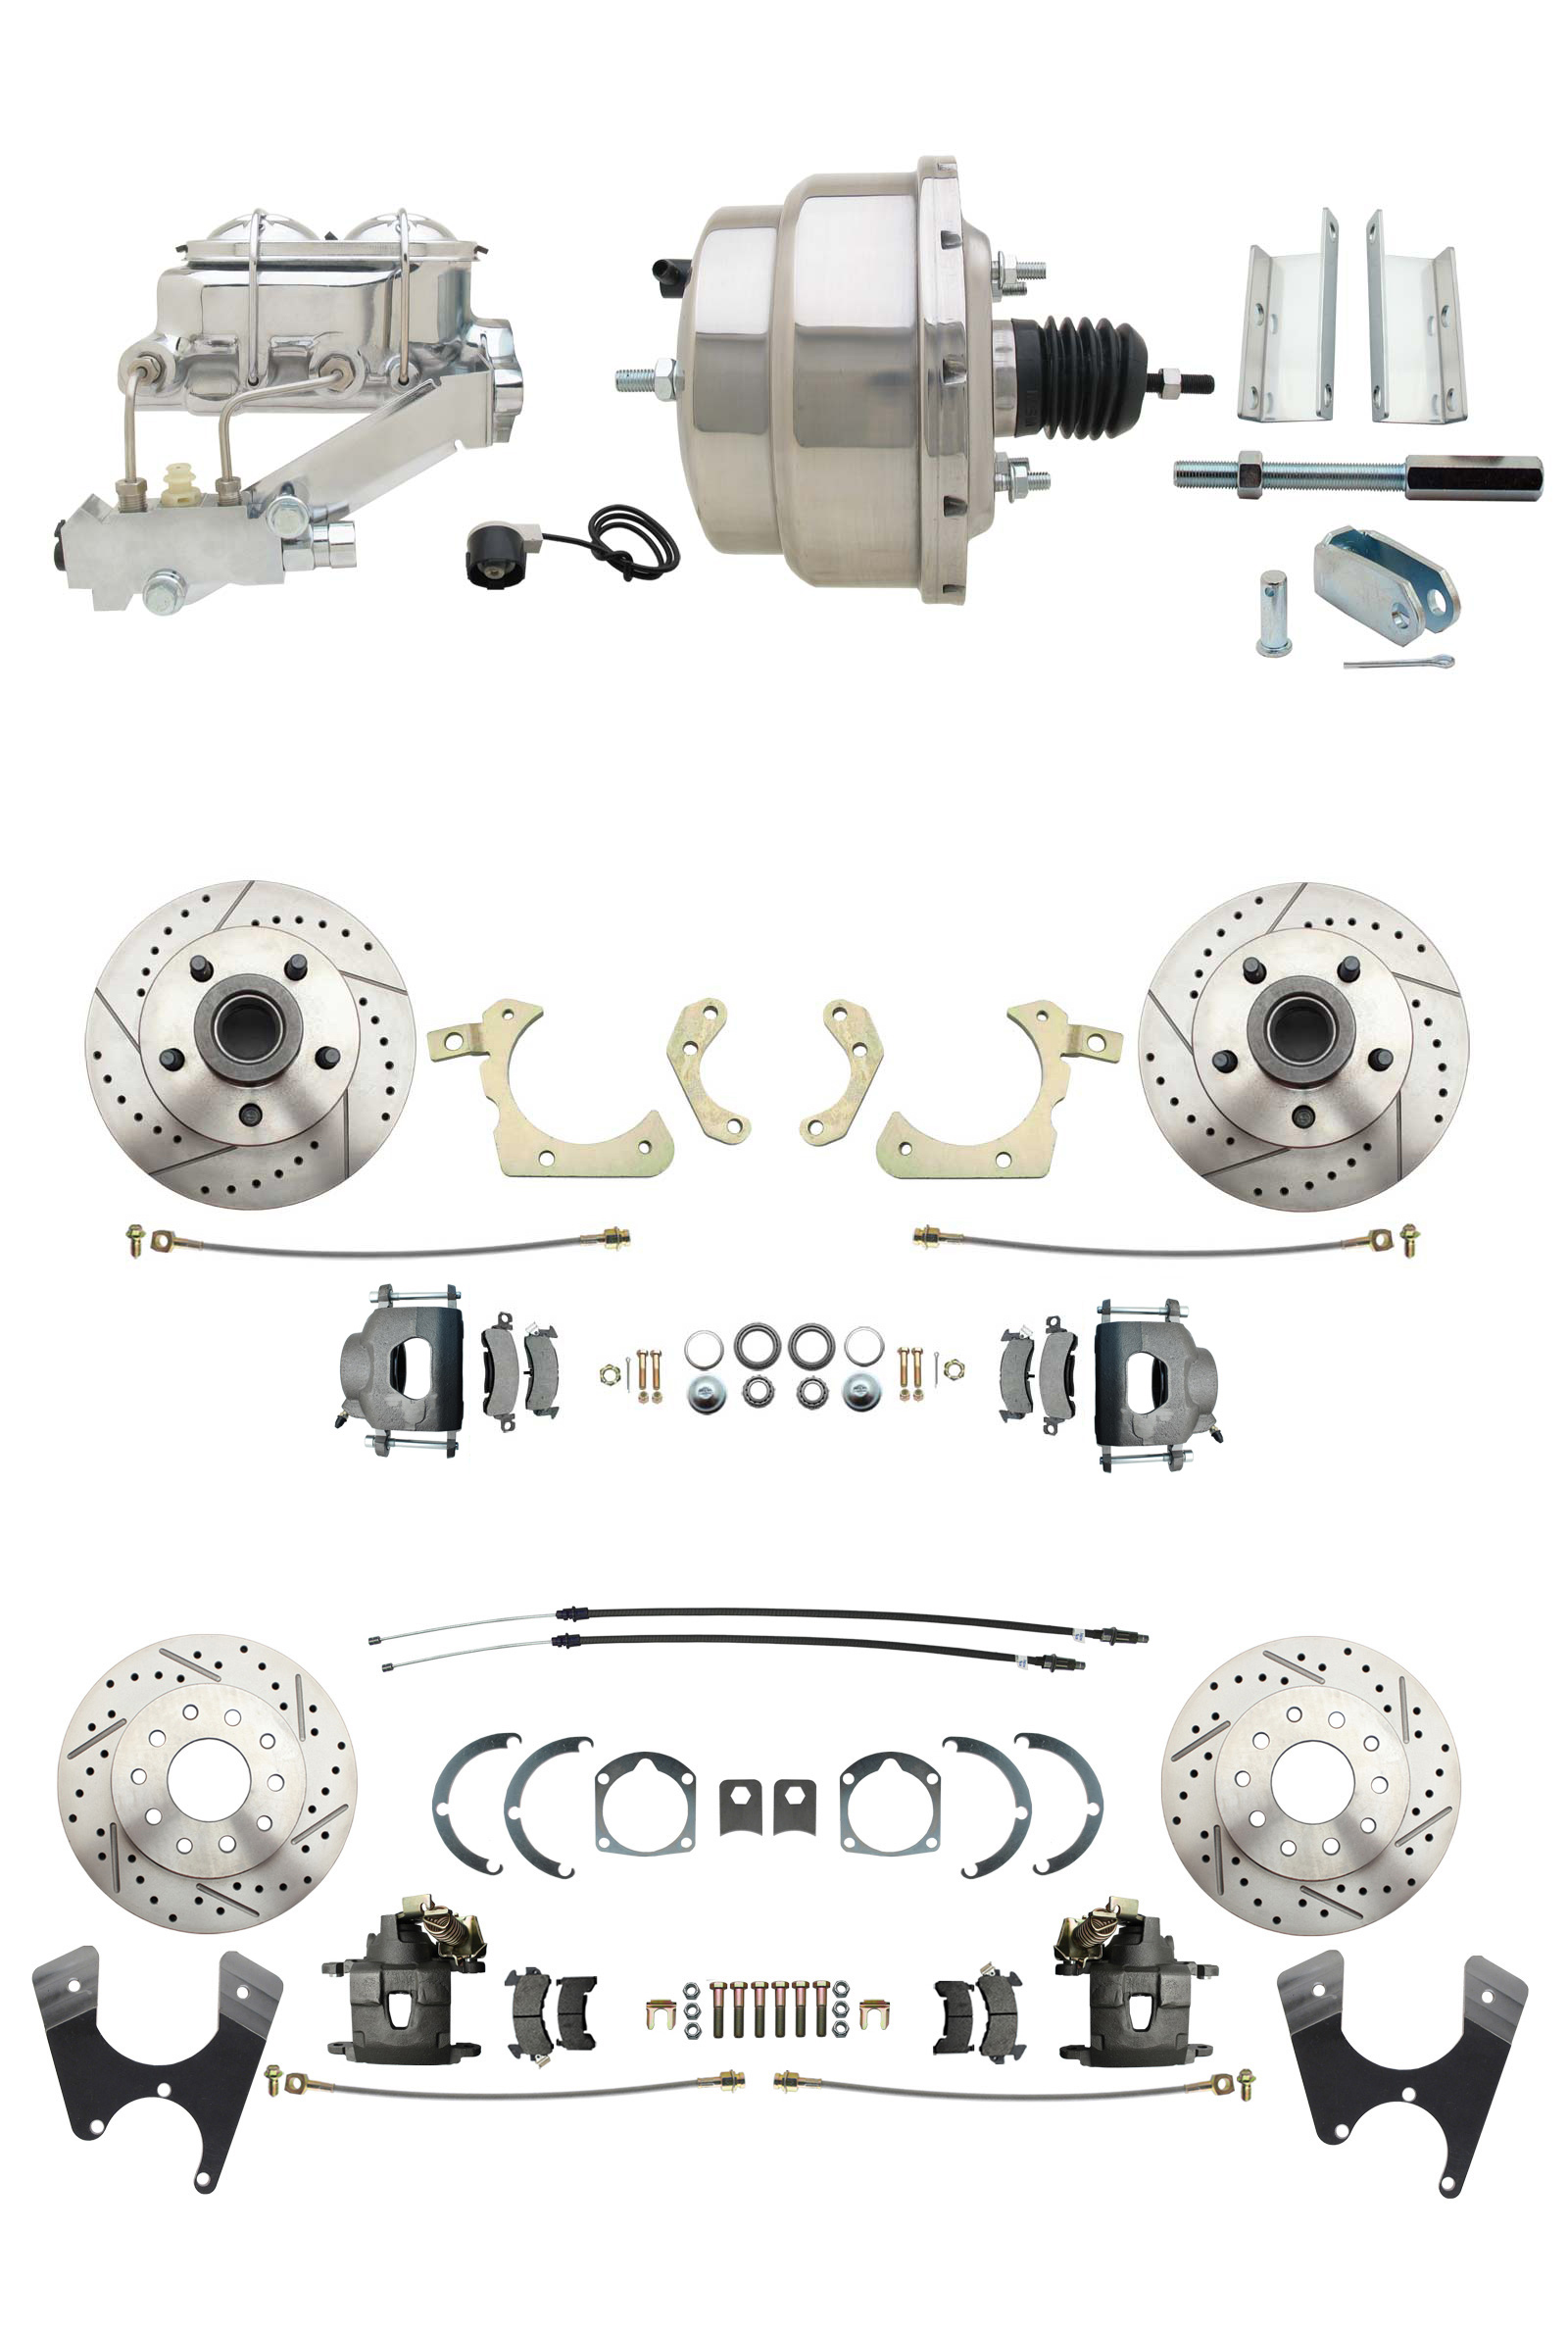 1955-1958 GM Full Size Disc Brake Kit Drilled/Slotted Rotors (Impala, Bel Air, Biscayne) & 8 Dual Stainless Steel Booster Conversion Kit W/ Chrome Master Cylinder Left Mount Disc/ Disc Proportioning Valve Kit